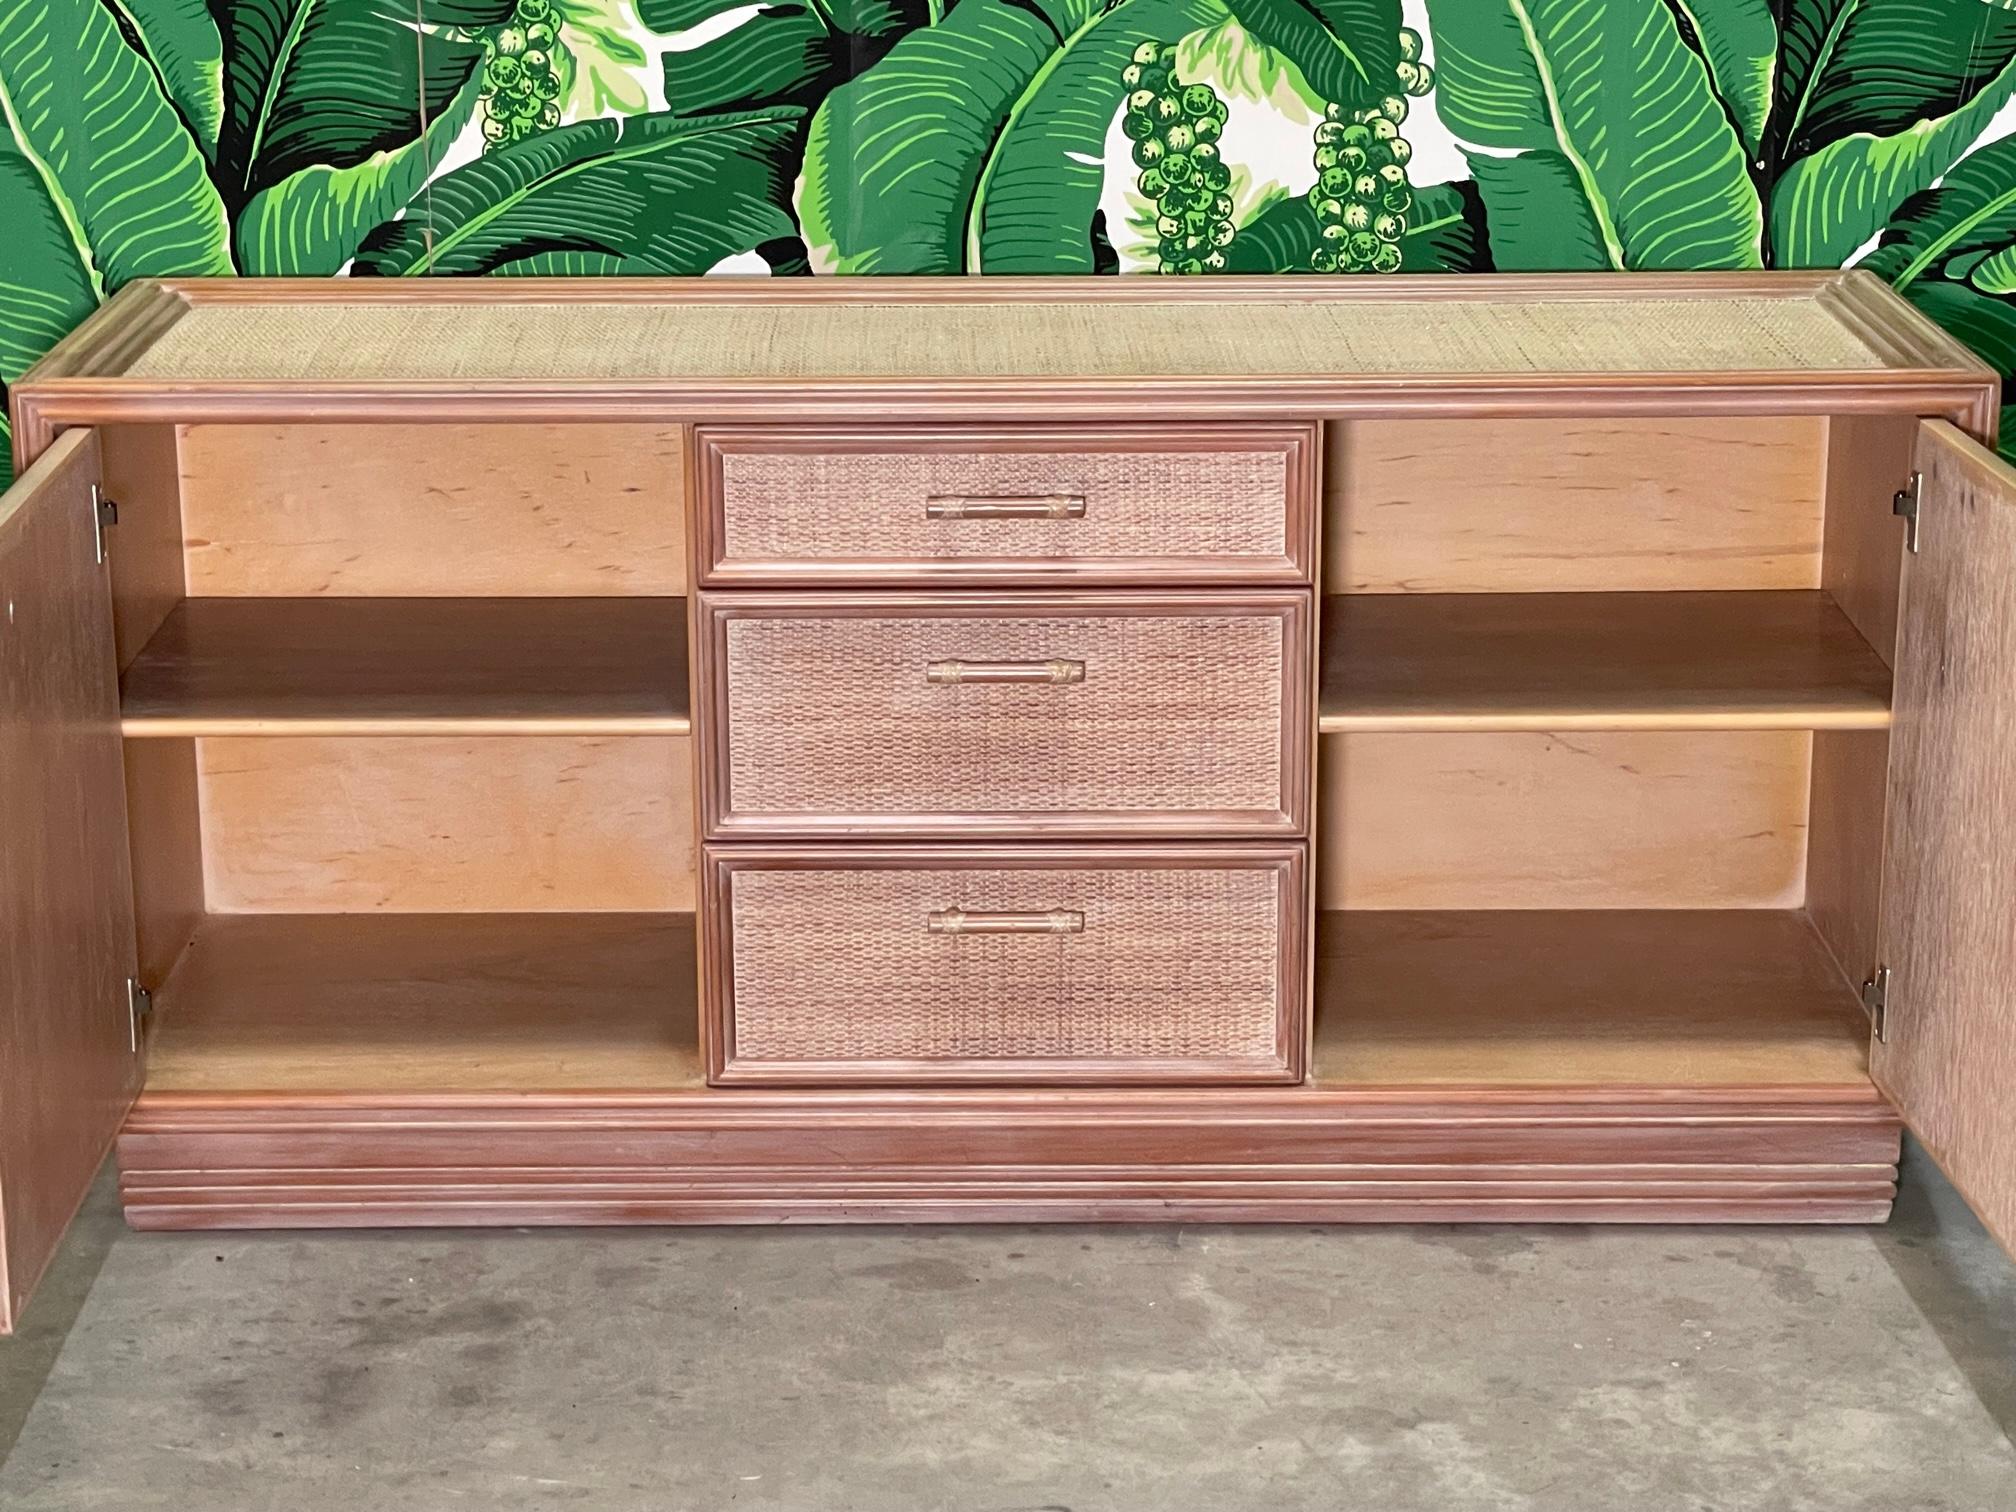 Organic Modern Rattan and Wicker Sideboard or Buffet Attribute to McGuire For Sale